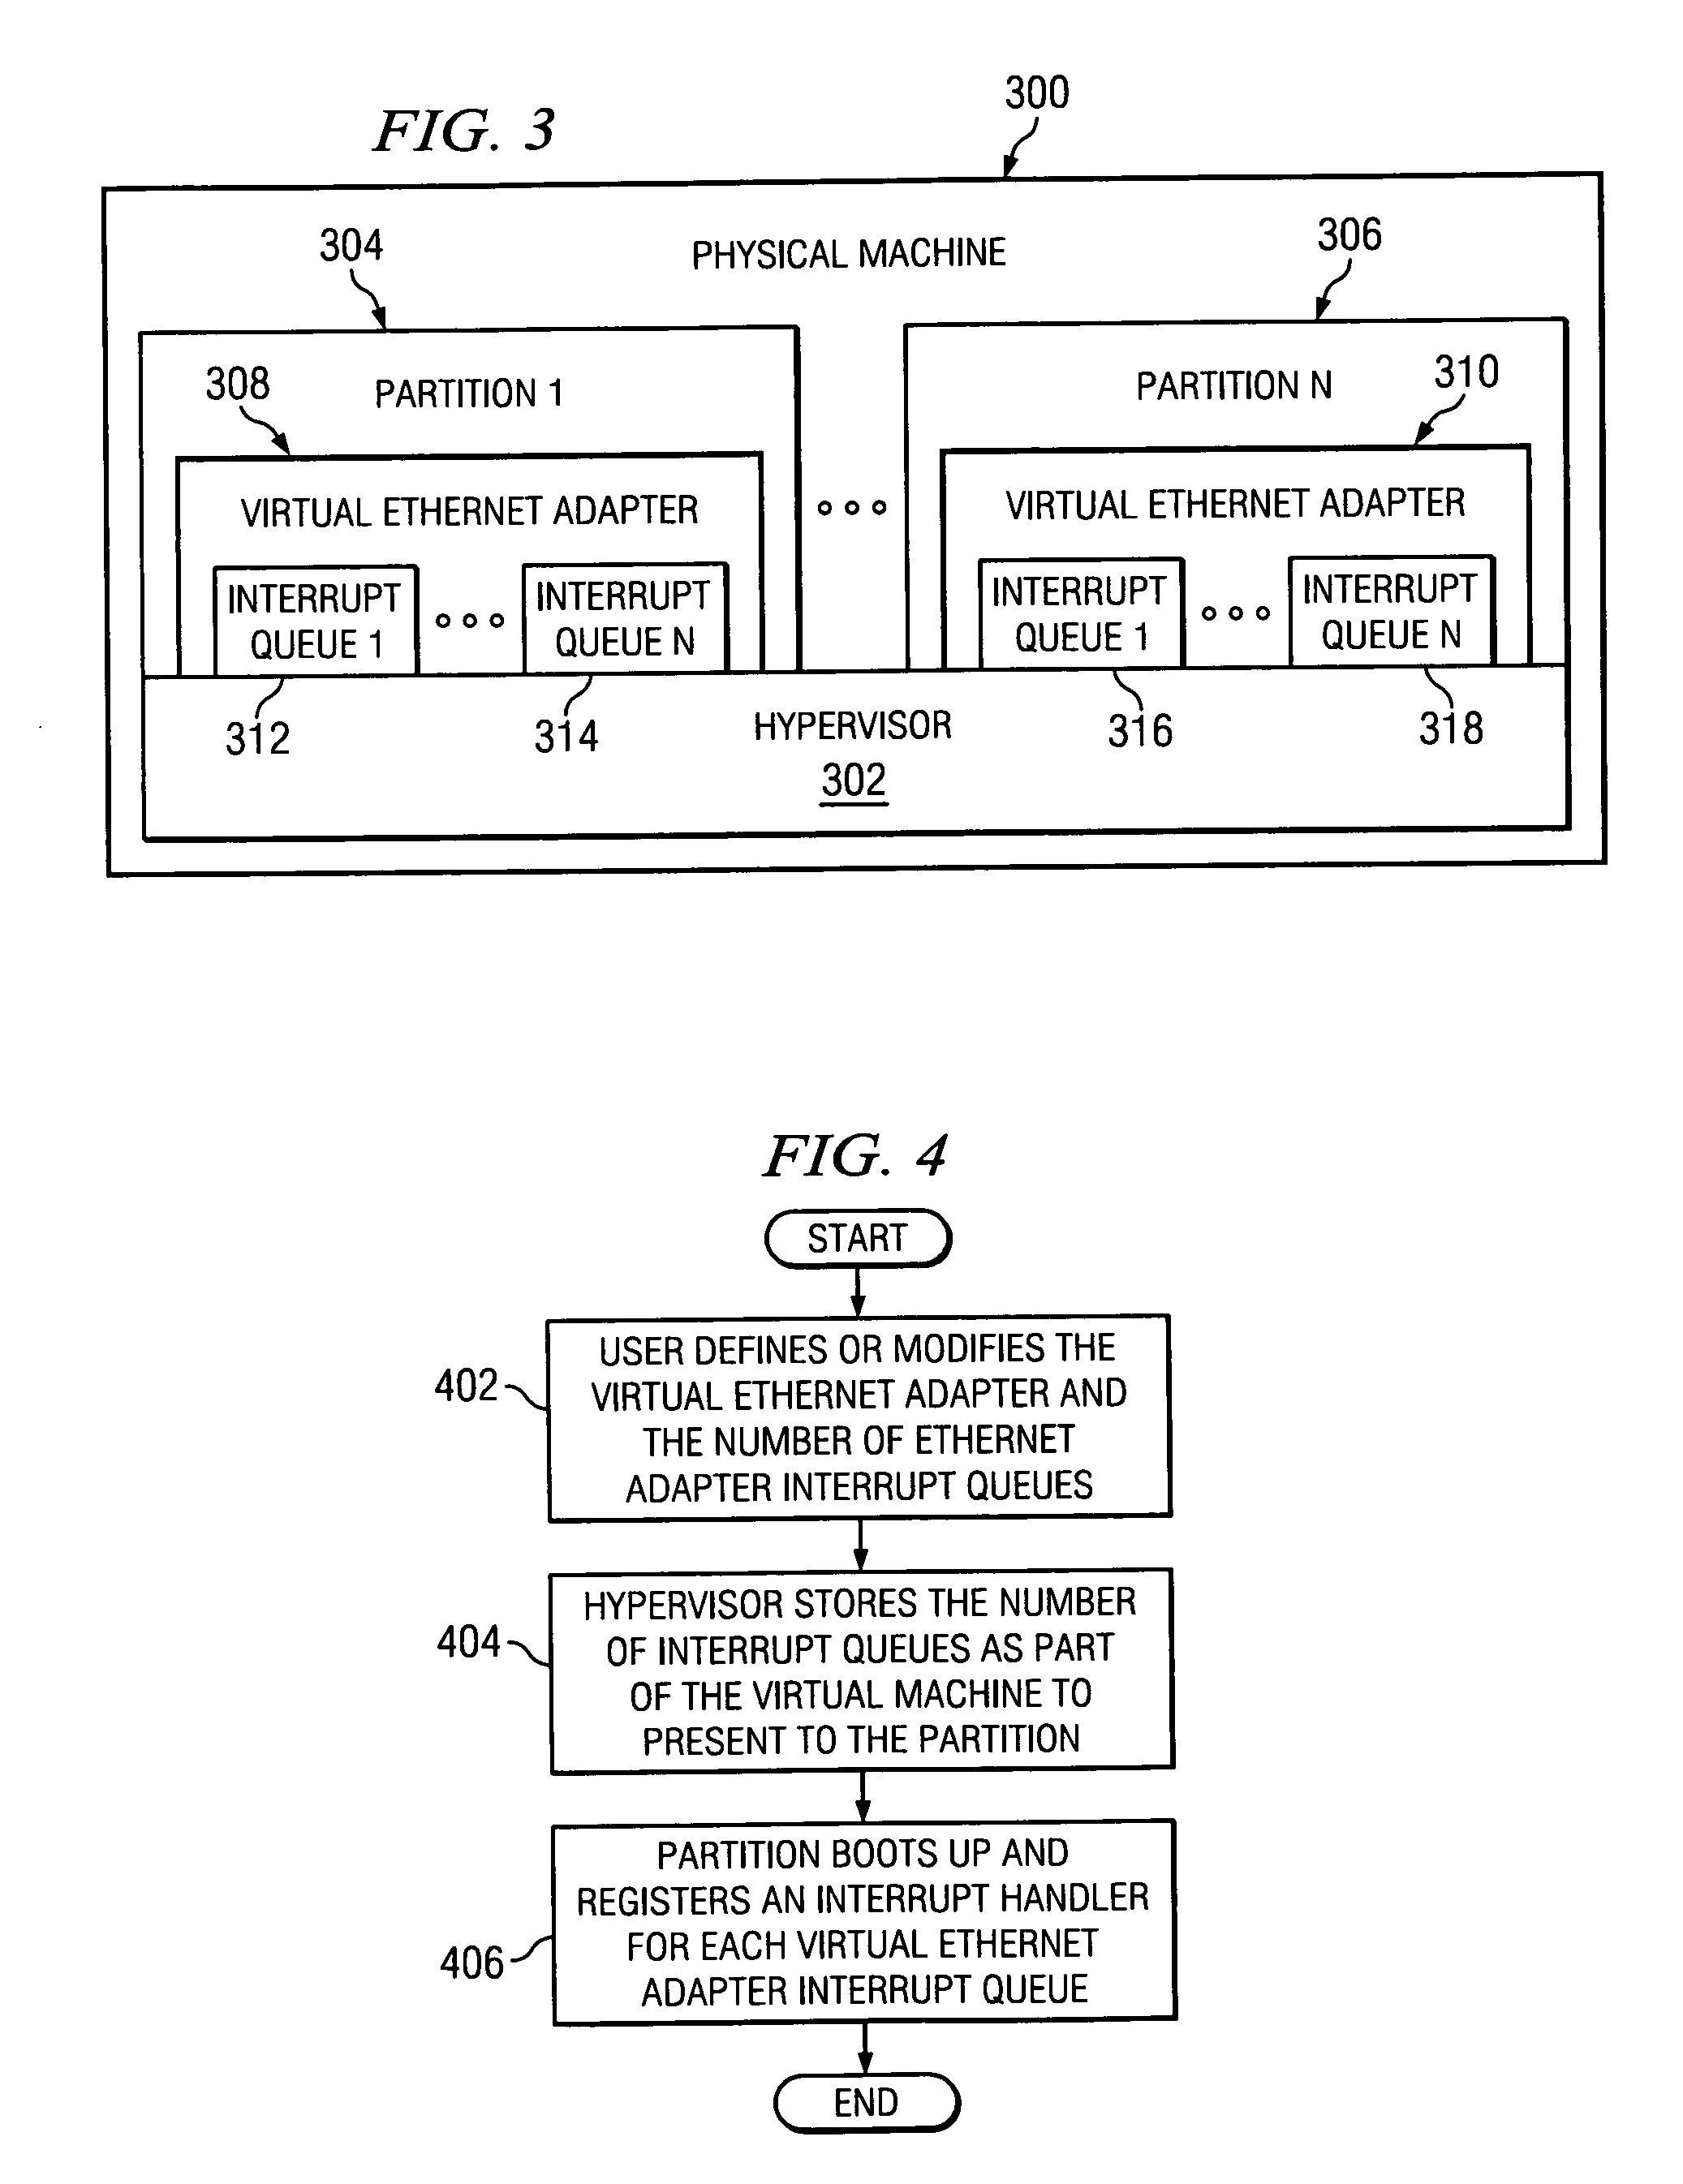 Method for improved virtual adapter performance using multiple virtual interrupts